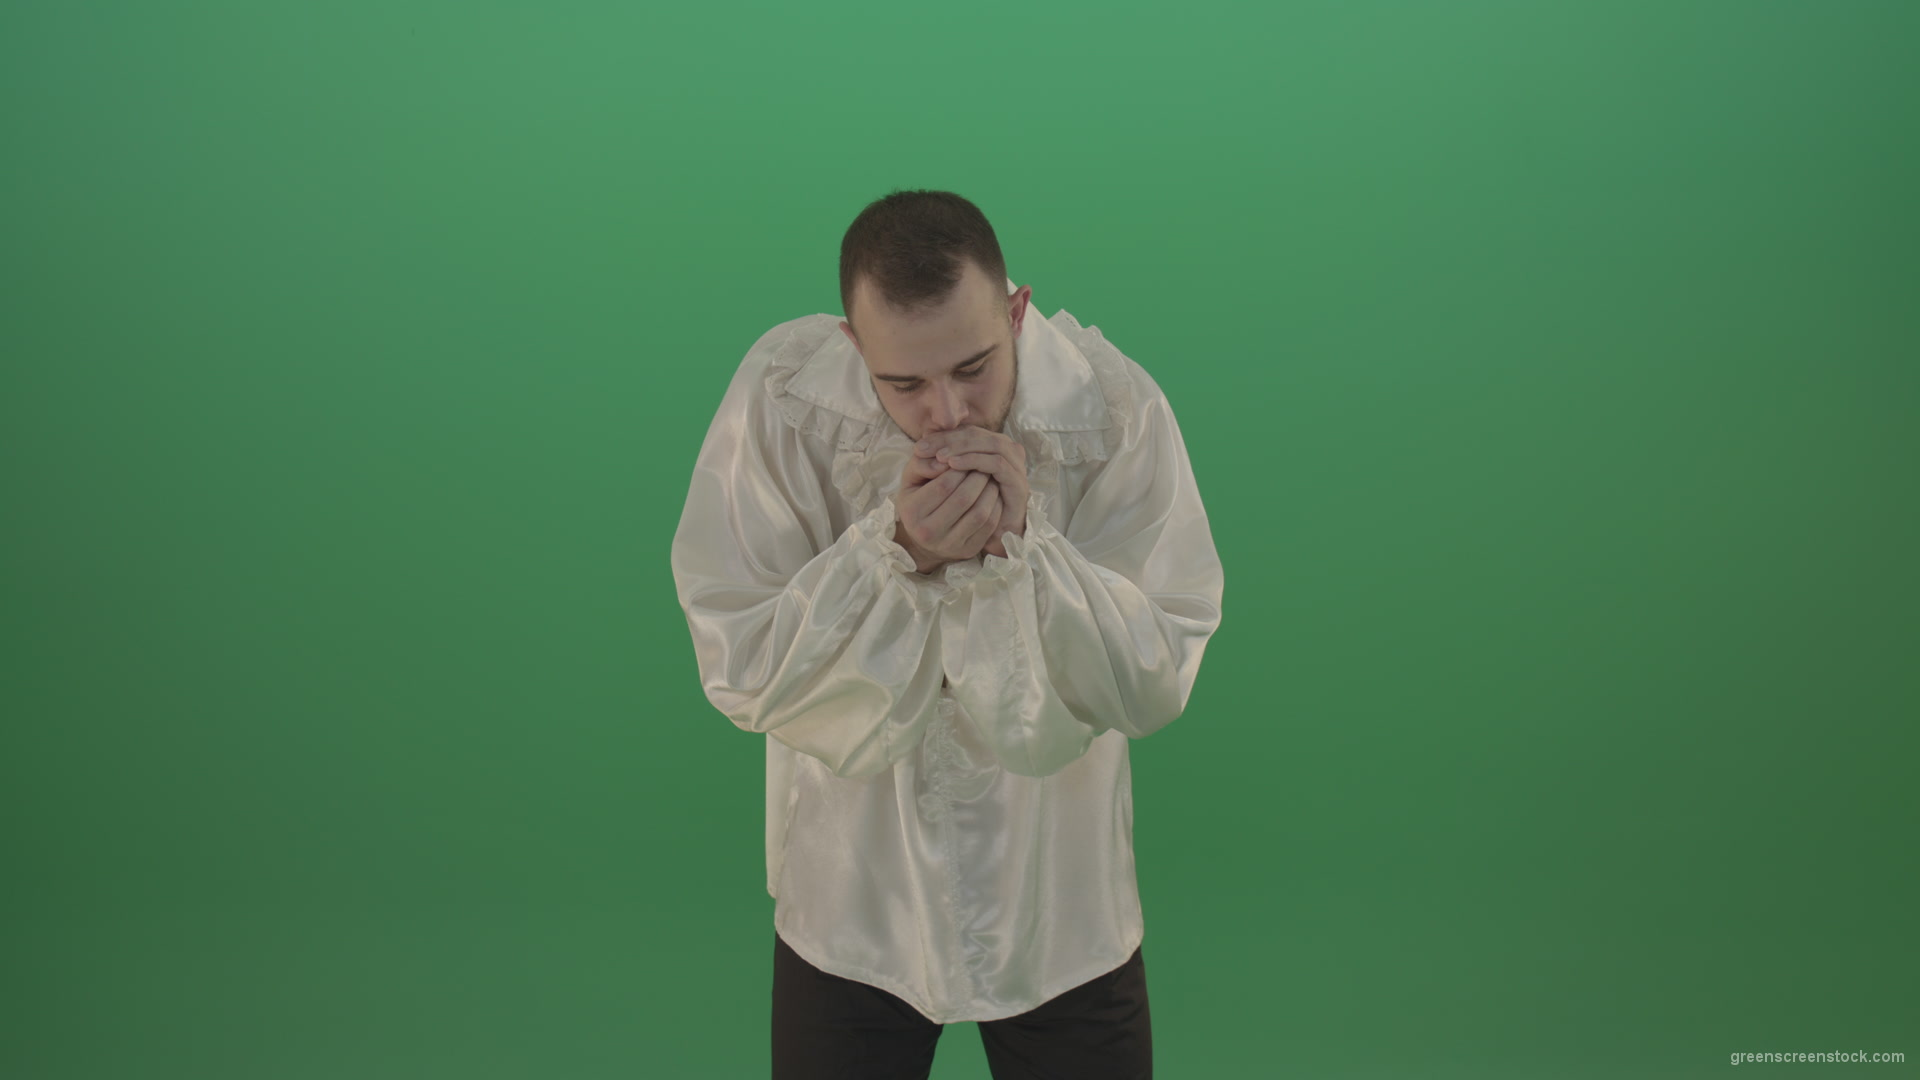 Boy-gives-flower-squeezing-in-the-sleeves-elegantly-in-hand-isolated-on-green-screen_004 Green Screen Stock